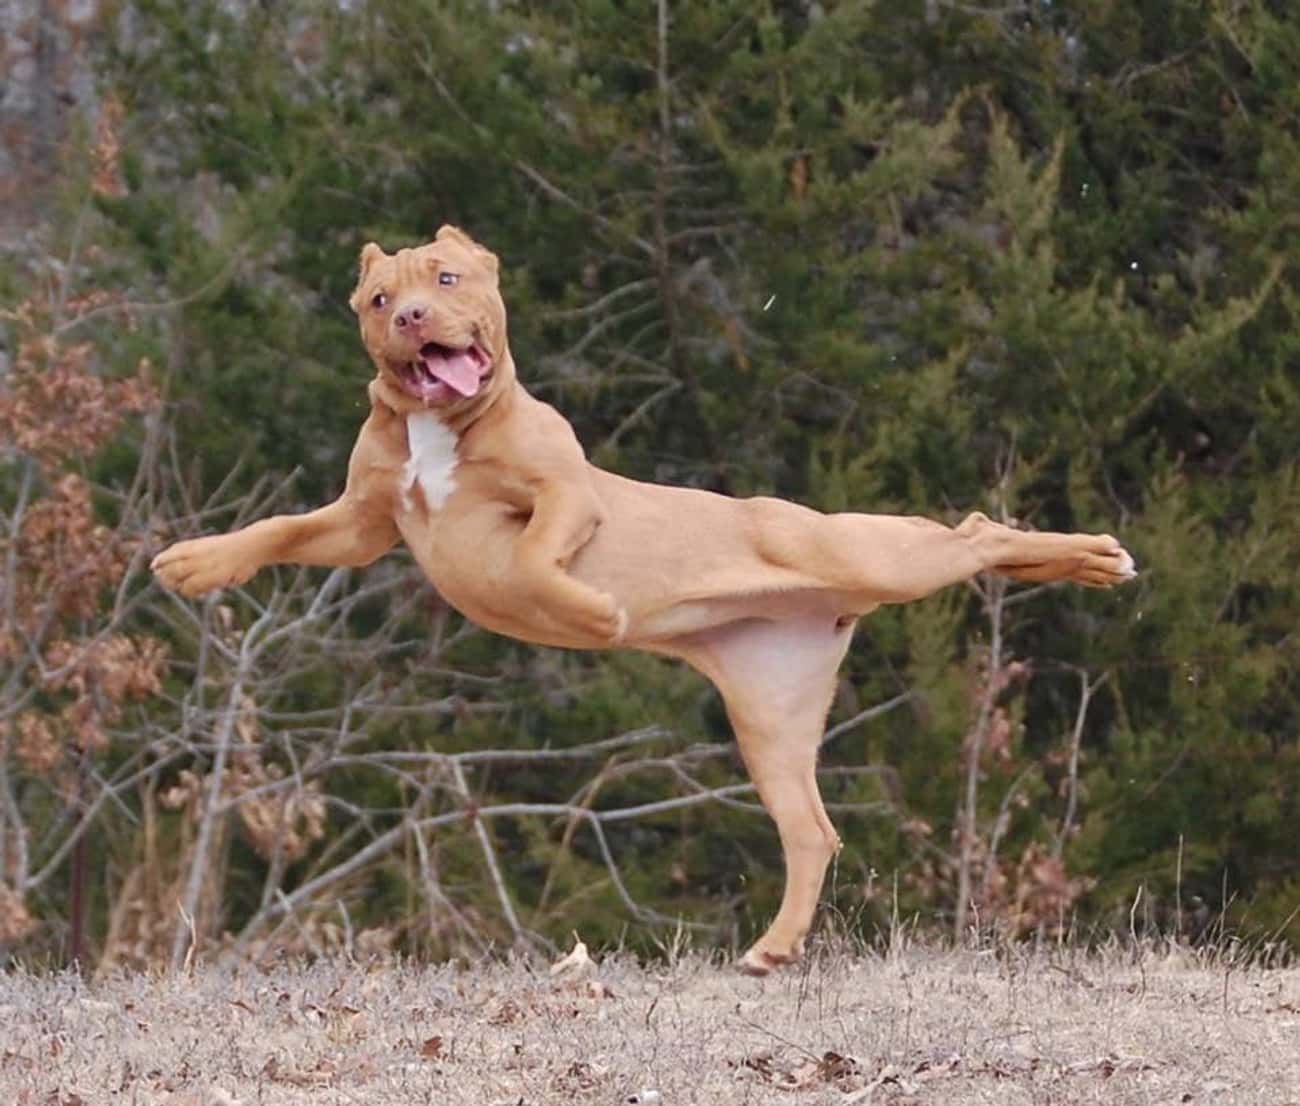 Dogs Are Graceful and Majestic Beasts